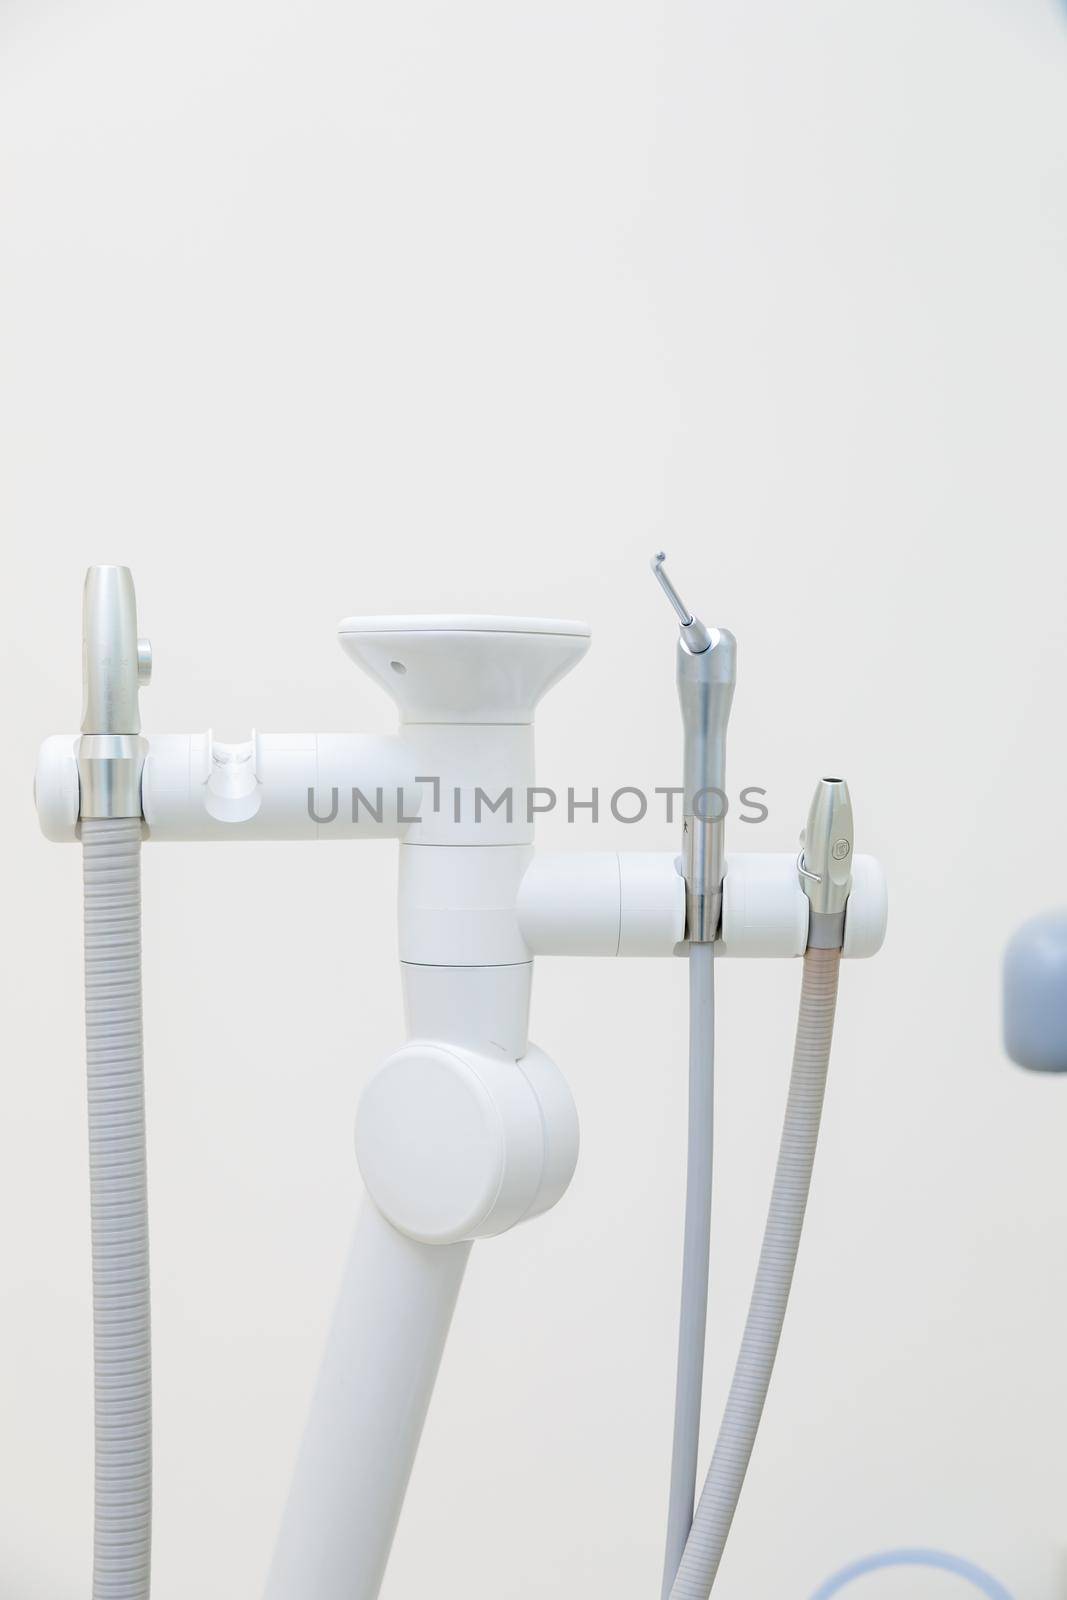 Medical equipment and devices in the dental office. by Yurich32